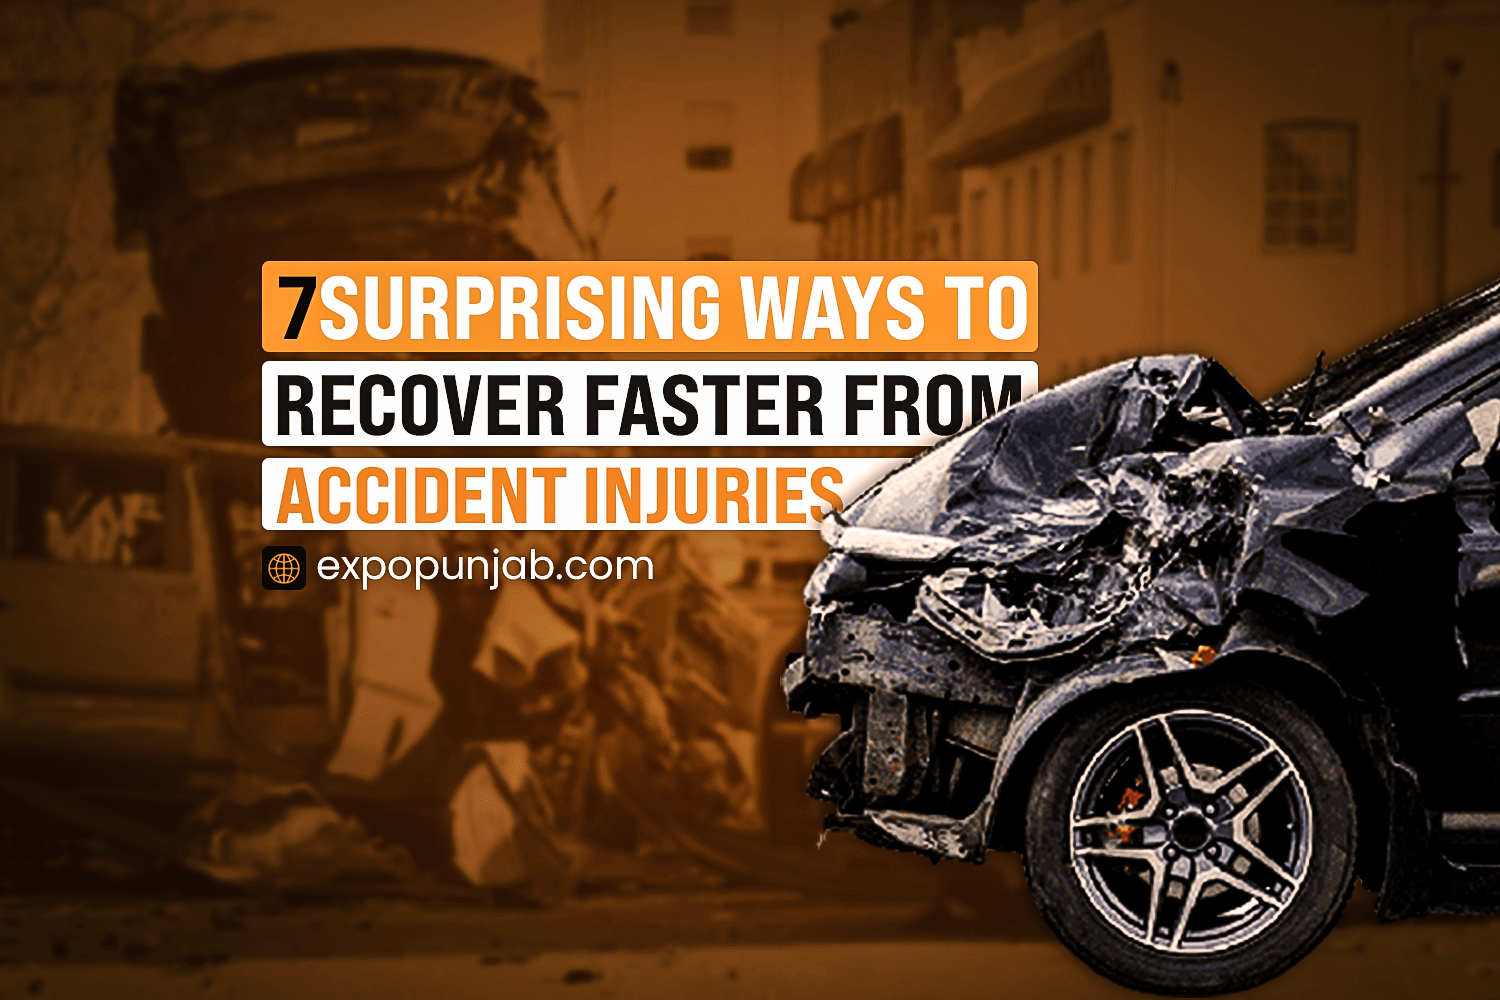 7 Surprising Ways to Recover Faster from Accident Injuries | Expopunjab